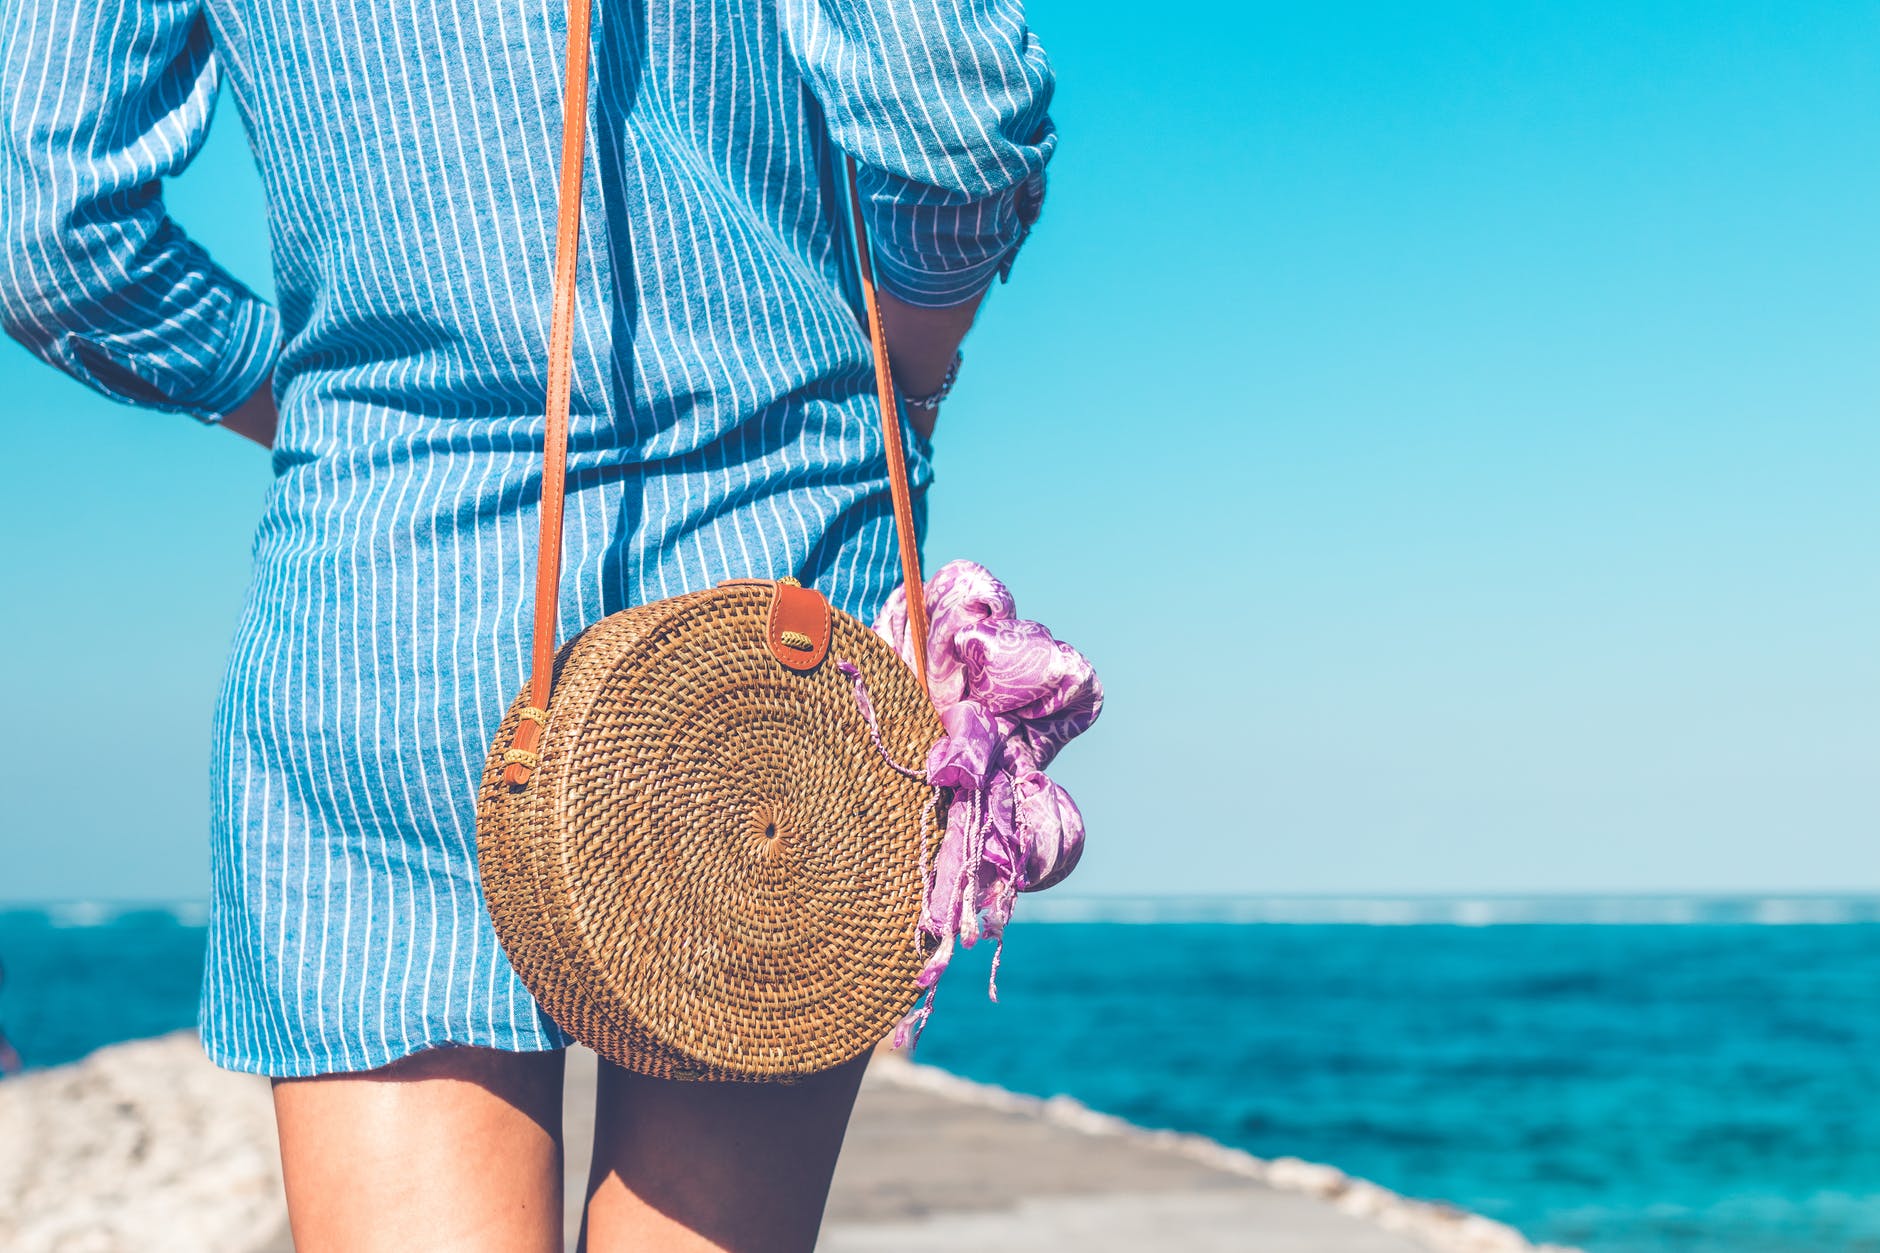 woman wearing blue and white striped dress with brown rattan crossbody bag near ocean